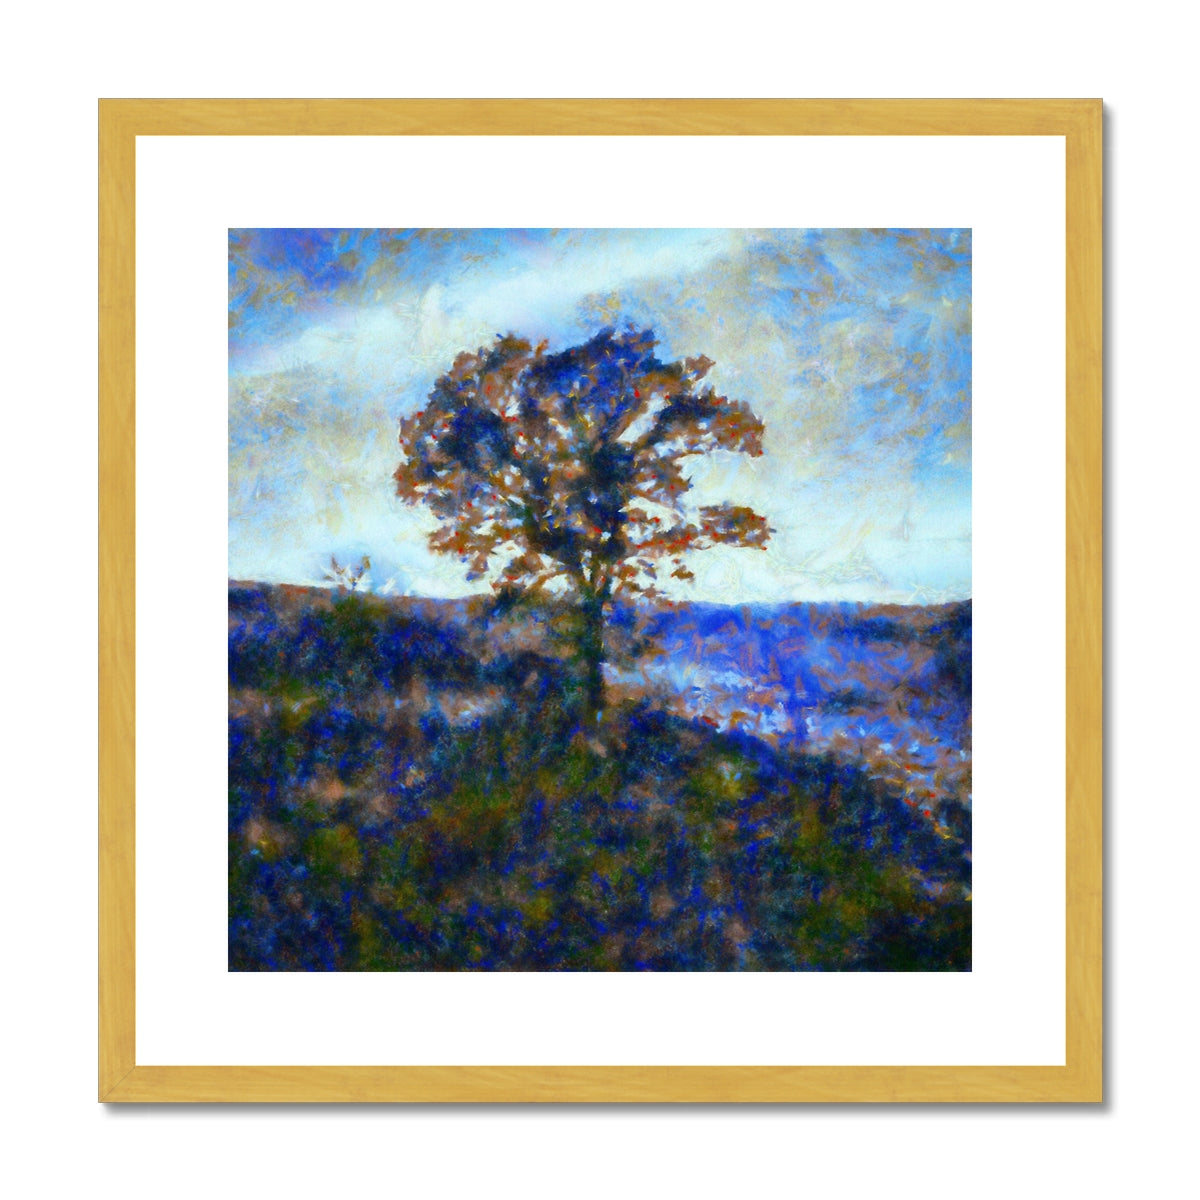 A Winter Highland Tree Painting | Antique Framed & Mounted Prints From Scotland-Antique Framed & Mounted Prints-Scottish Highlands & Lowlands Art Gallery-20"x20"-Gold Frame-Paintings, Prints, Homeware, Art Gifts From Scotland By Scottish Artist Kevin Hunter